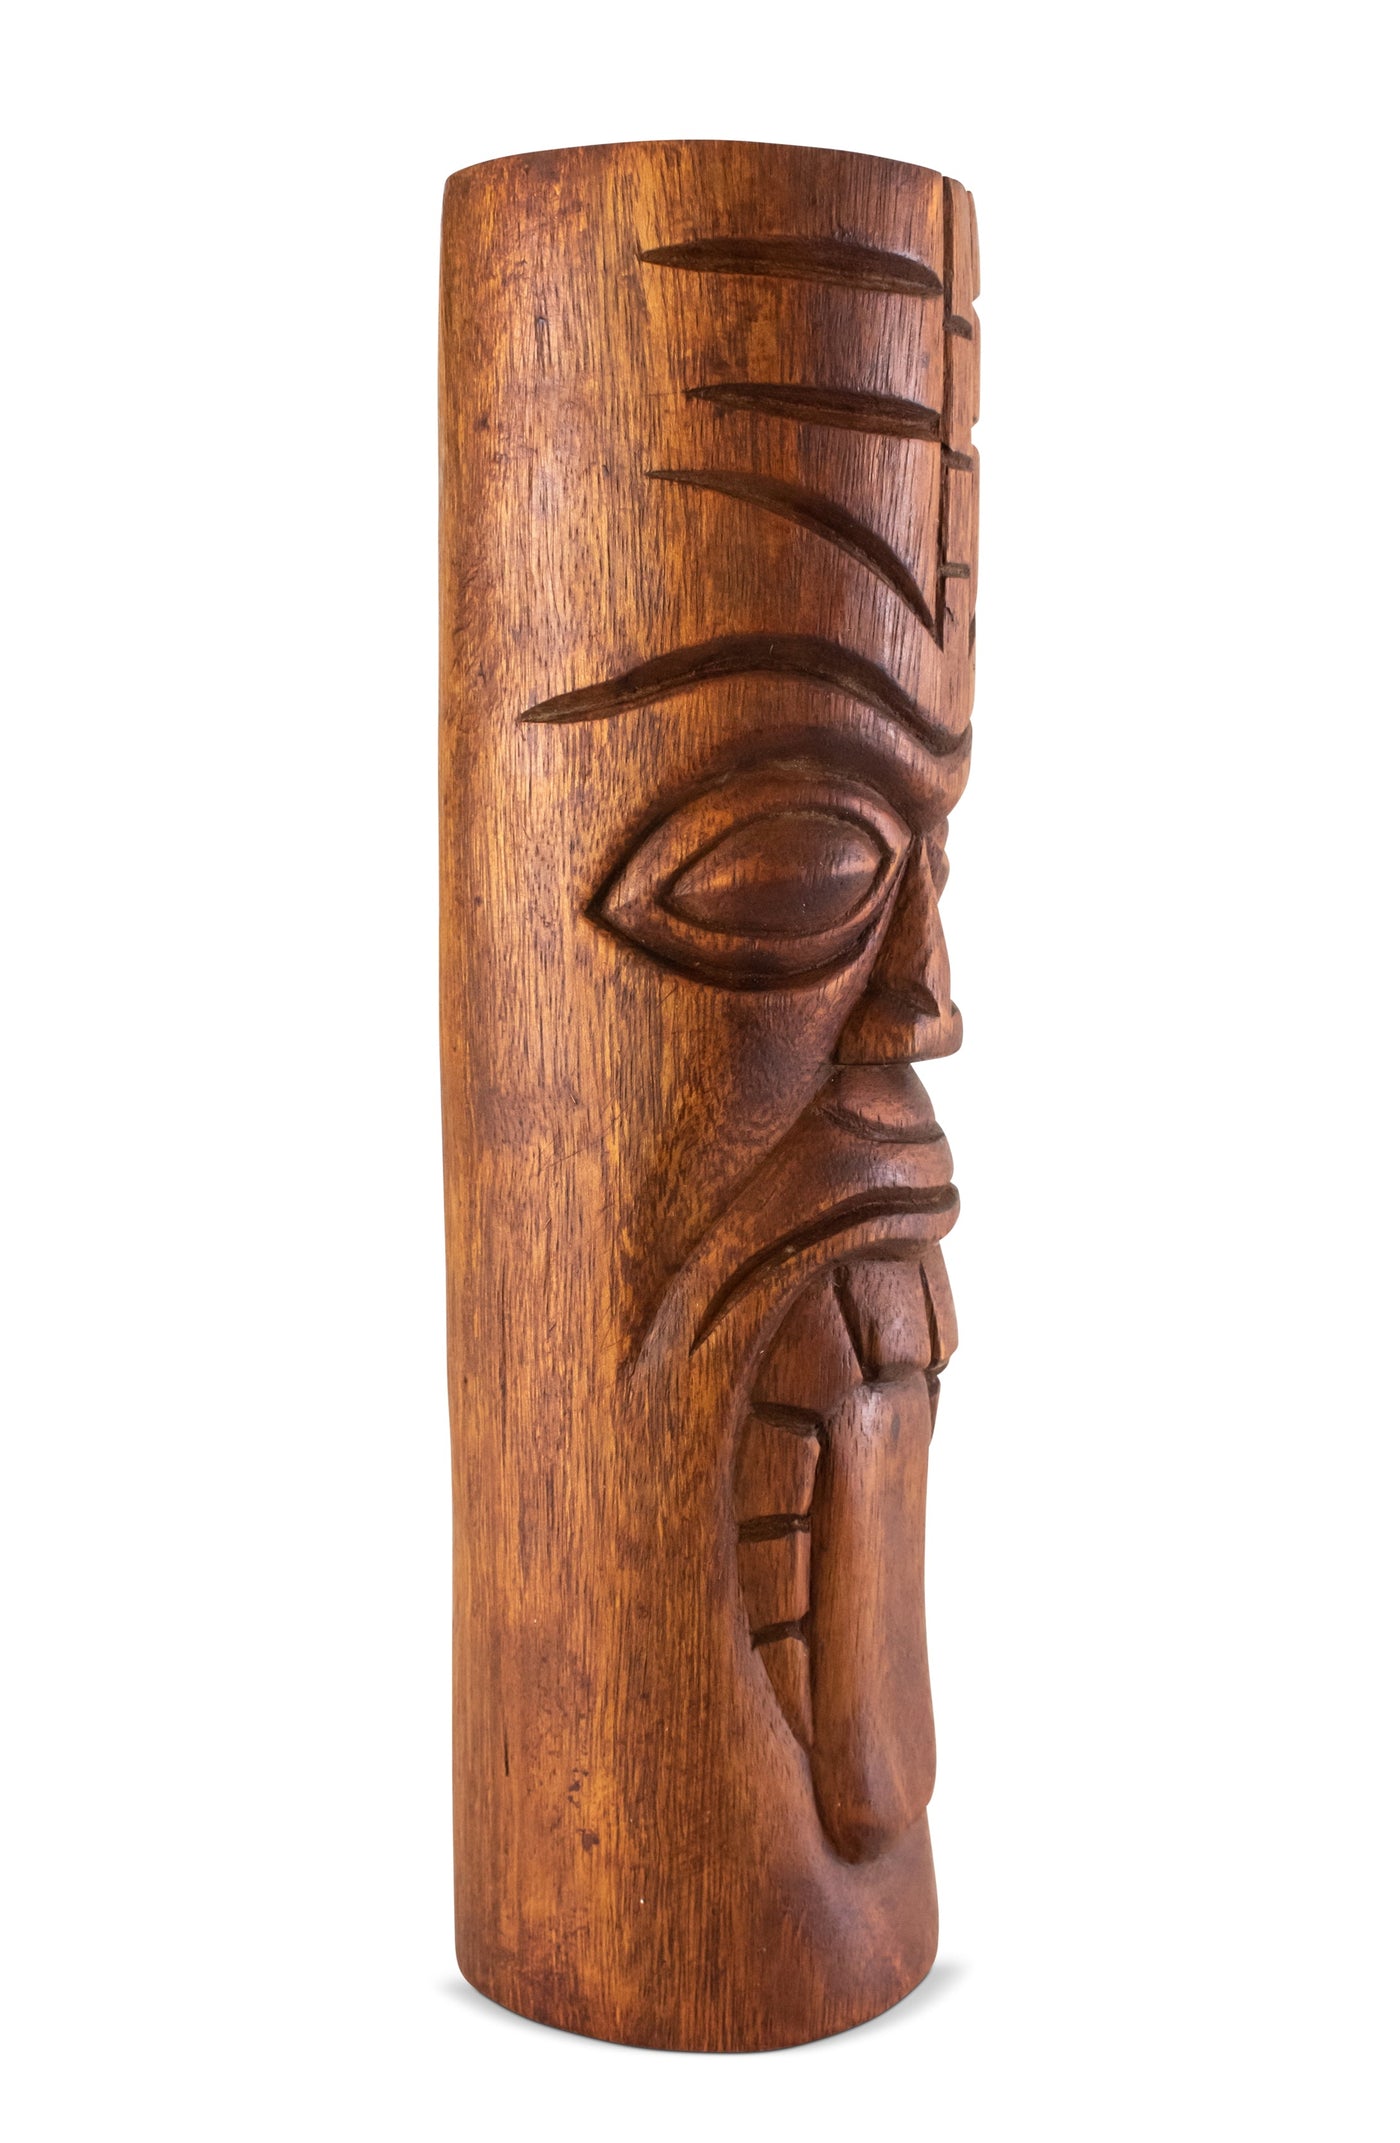 Handmade Wooden Primitive Sticking Tongue Out Tribal Statue Sculpture Tiki Bar Handcrafted Gift Home Decor Accent Figurine Artwork Hand Carved Wood